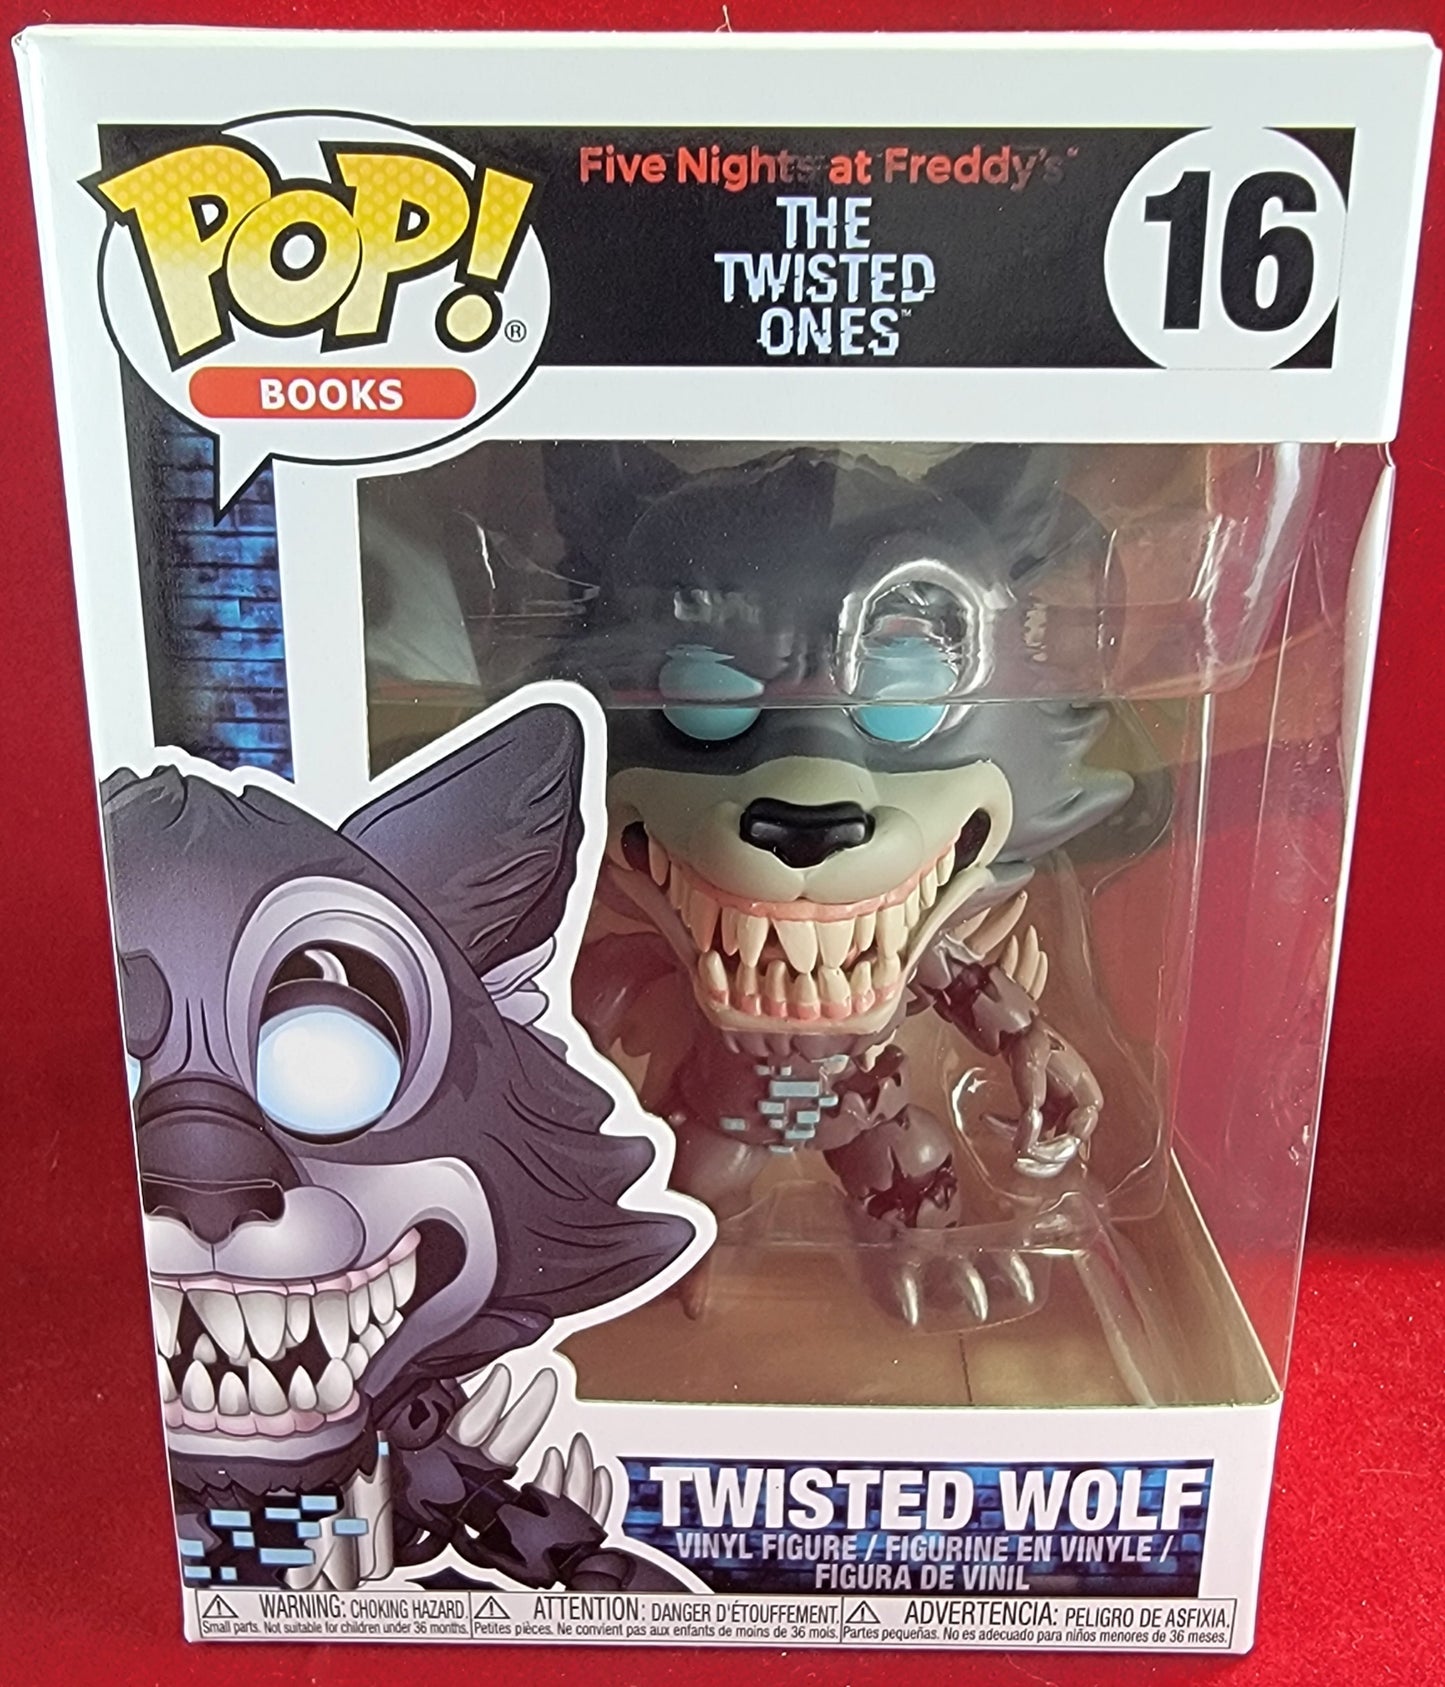 Twisted wolf funko # 16 (nib)
With pop protector